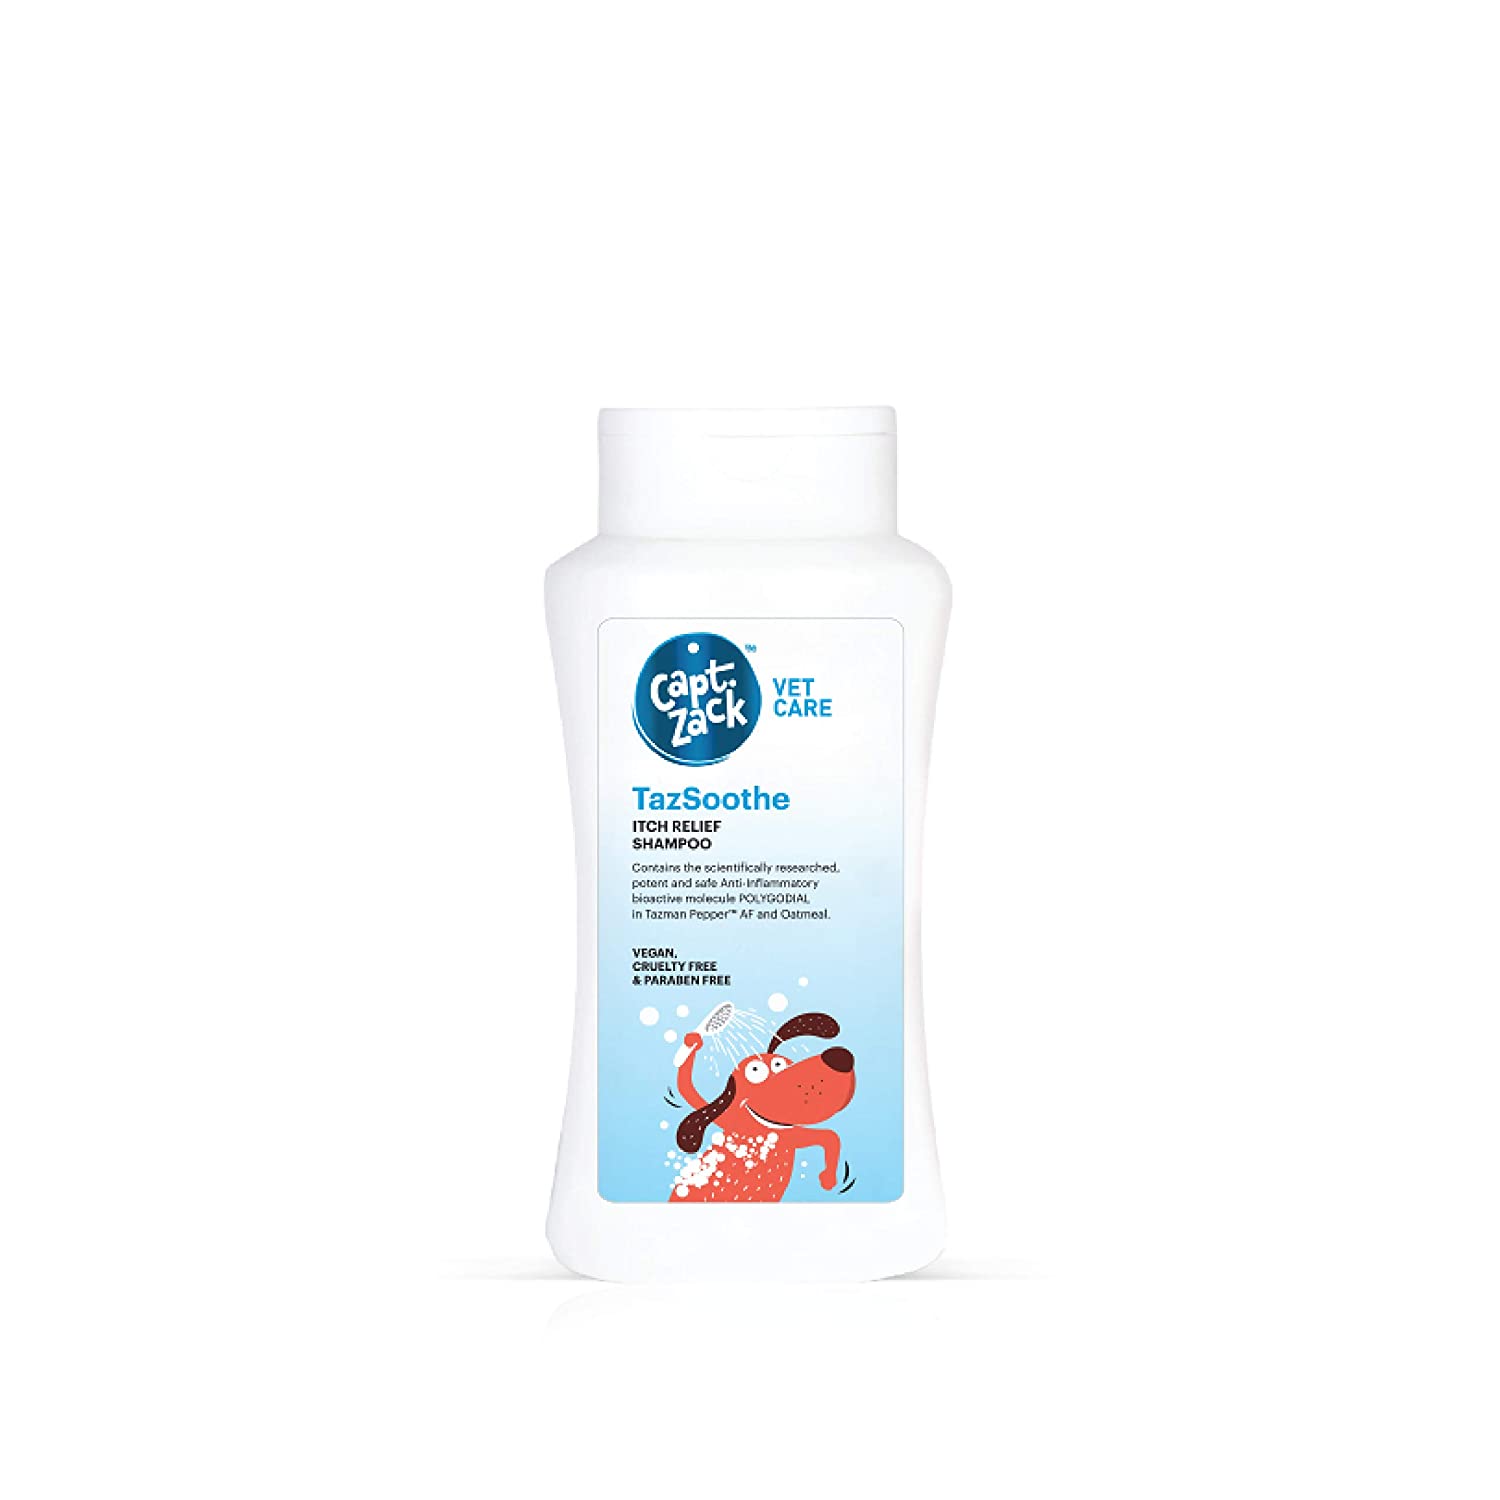 Captain Zack TazSoothe Itch Relief Shampoo - Itch No More Shampoo for Dogs, 50 ml